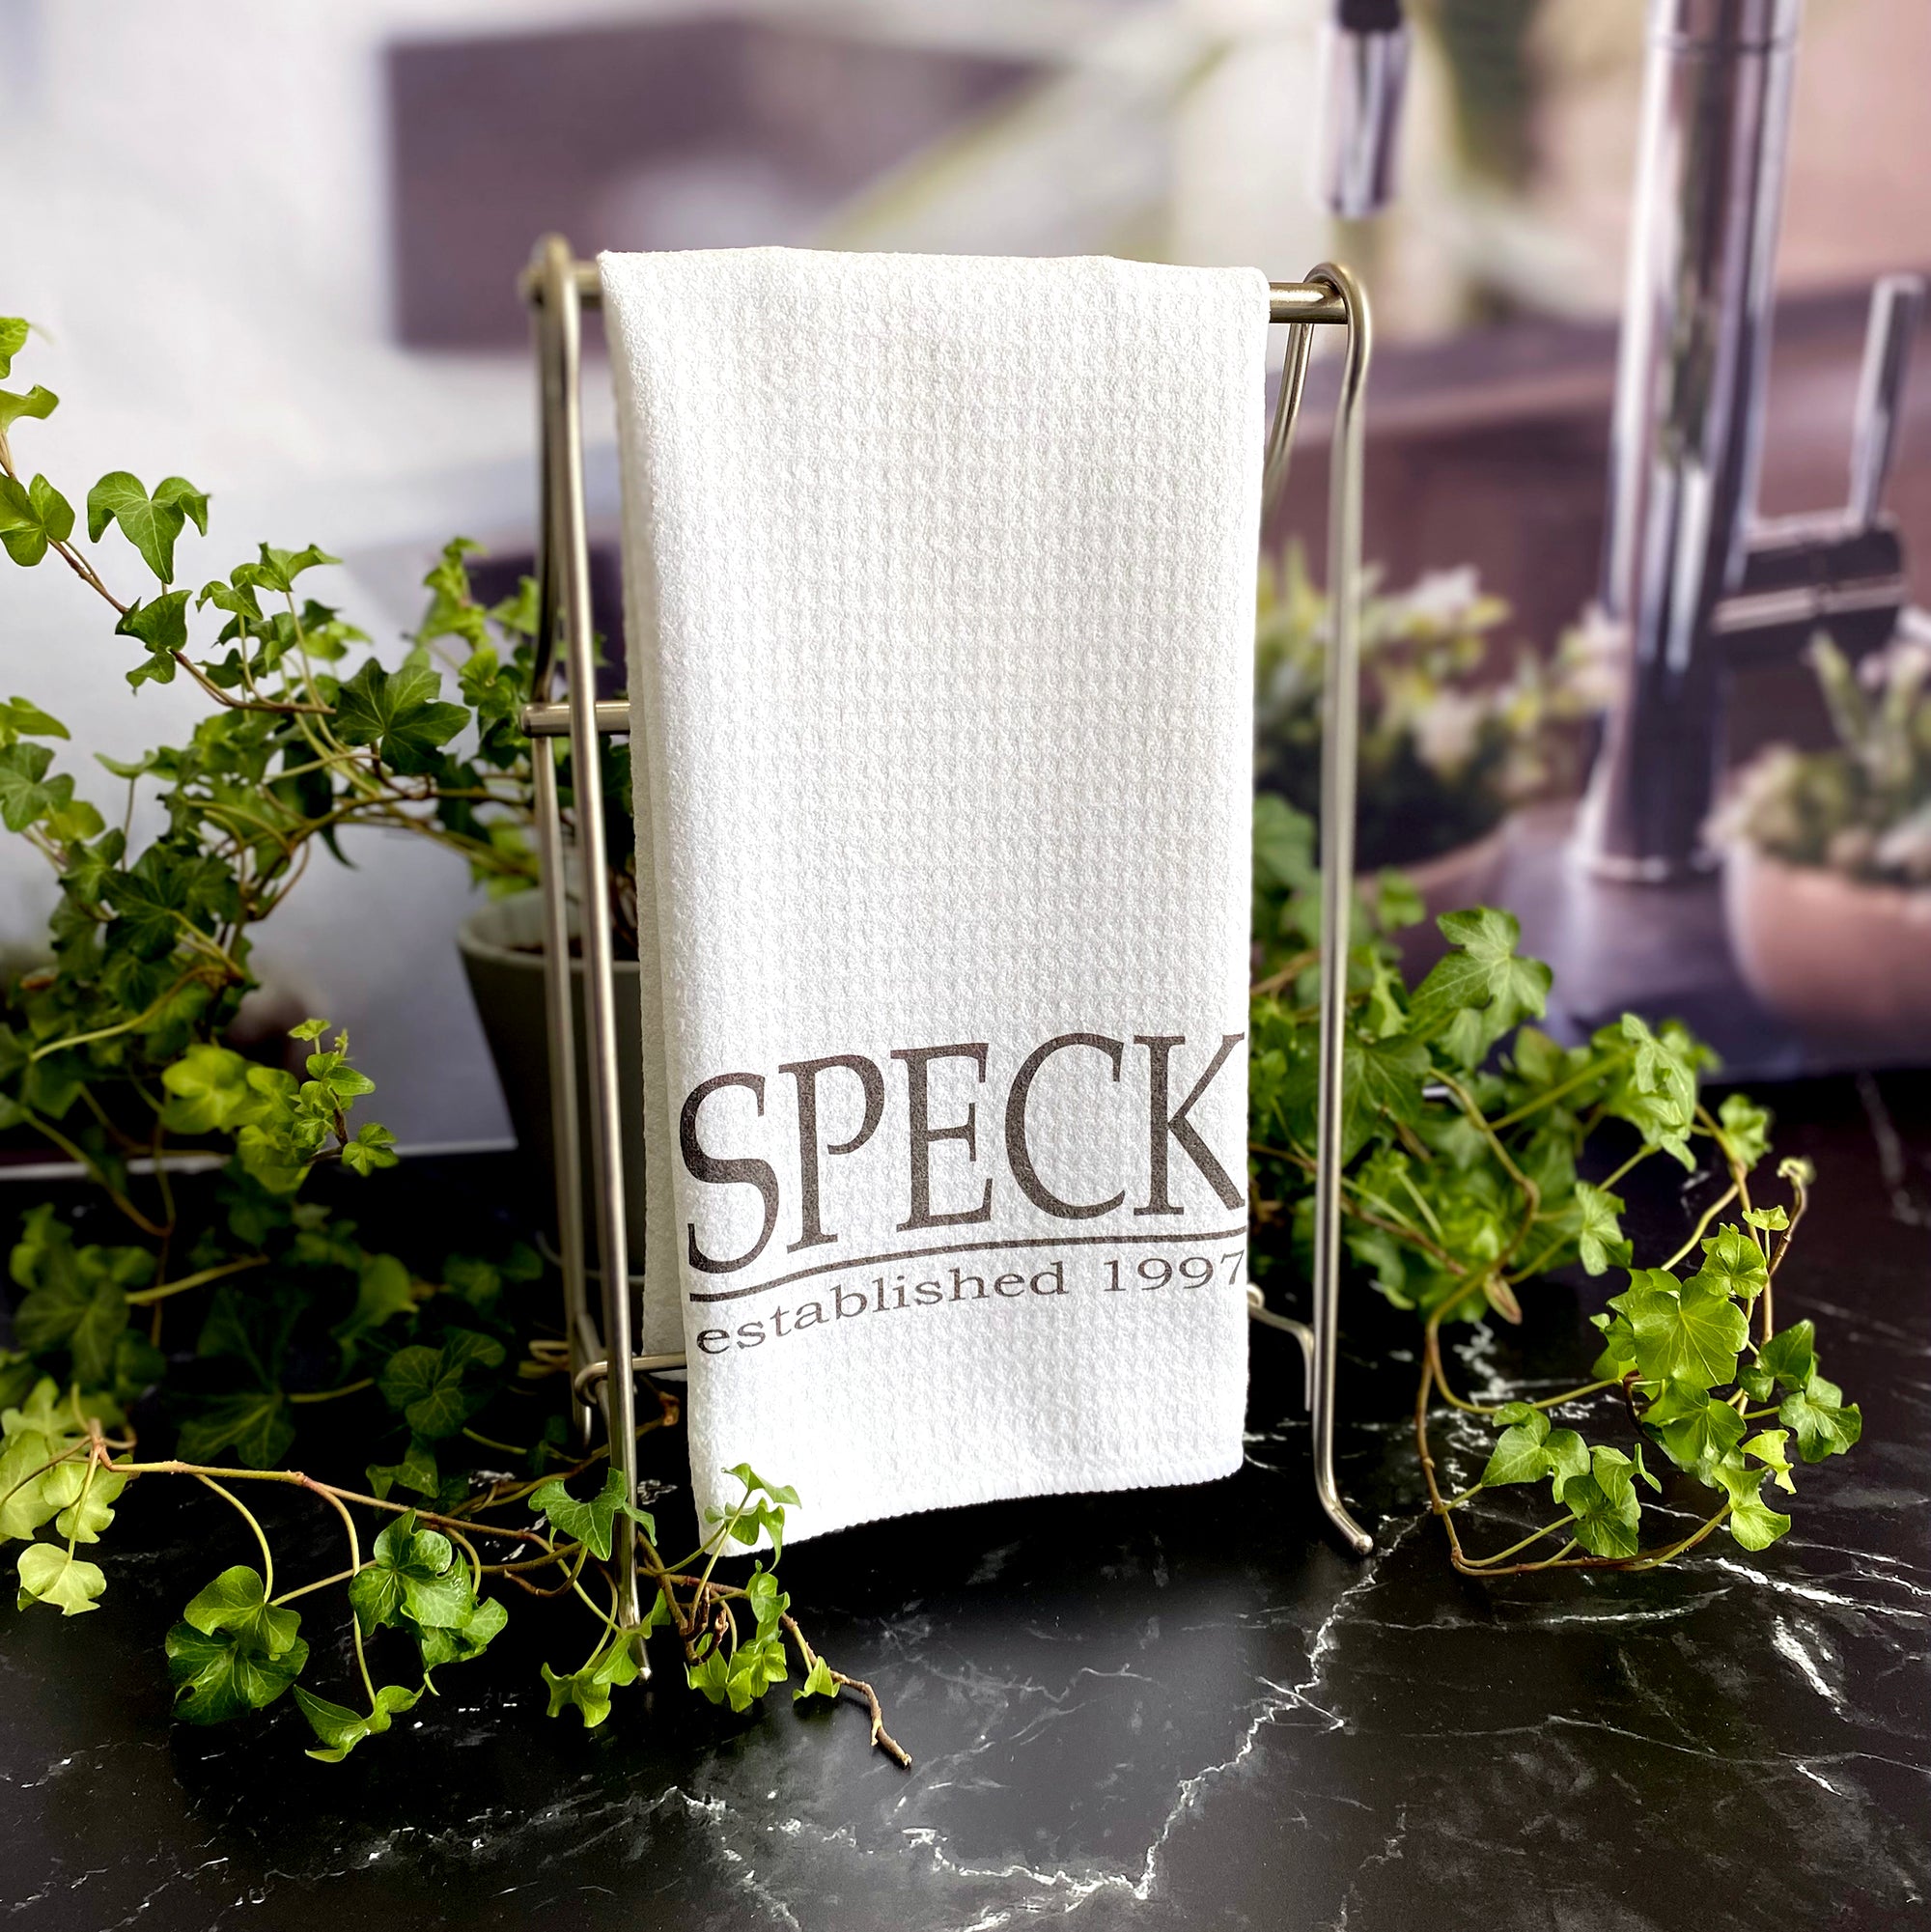 A White waffle dishtowel with a last name in all capital letters in a serif font with a line under the name and the established year below that.  The towel is hanging form a metal stand, surrounded by ivy on a black marble surface.